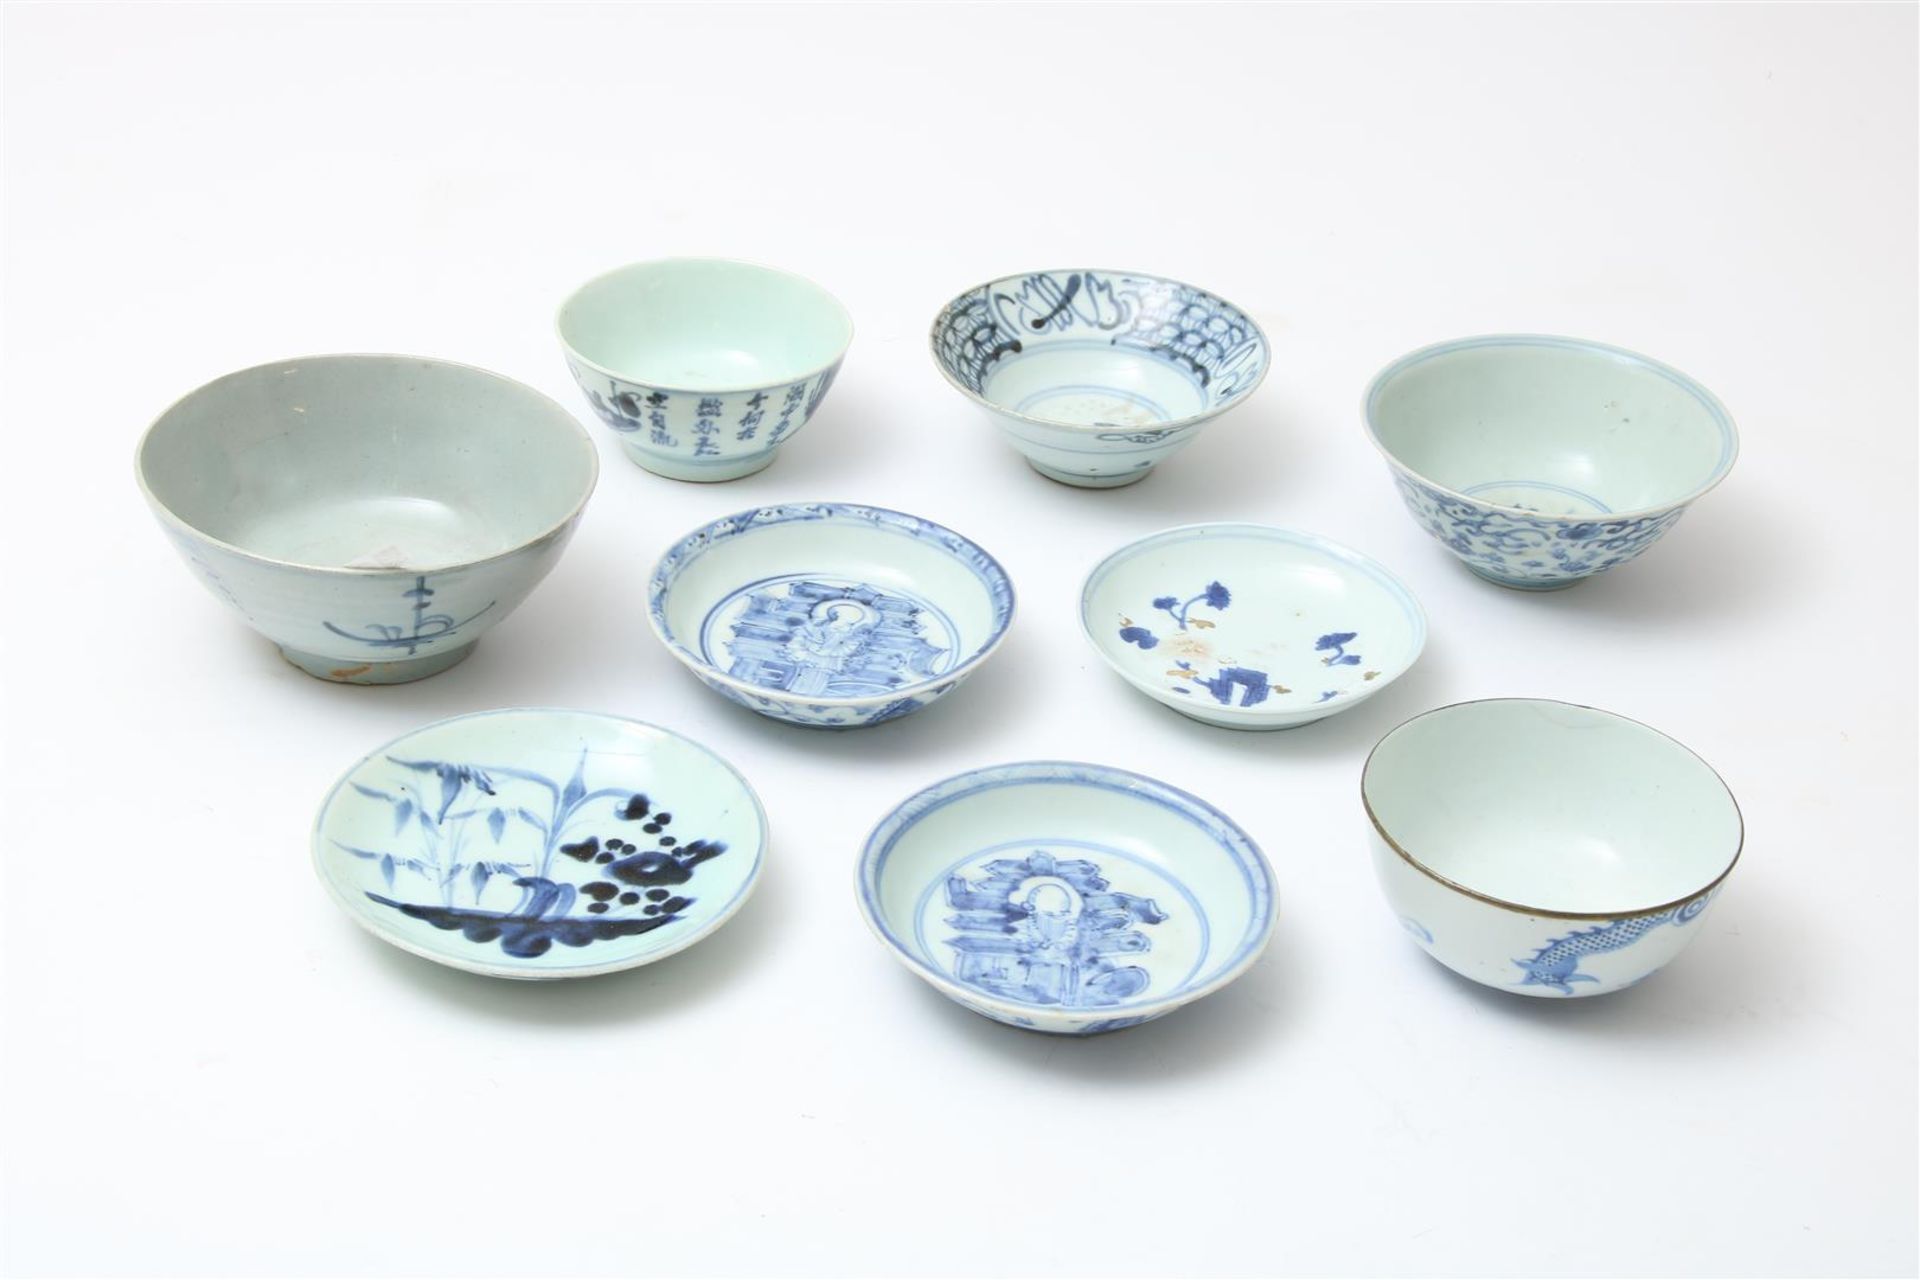 Lot of 5 porcelain dishes (edge flakes) and 4 various saucers, including The Nanking Cargo and Ming,